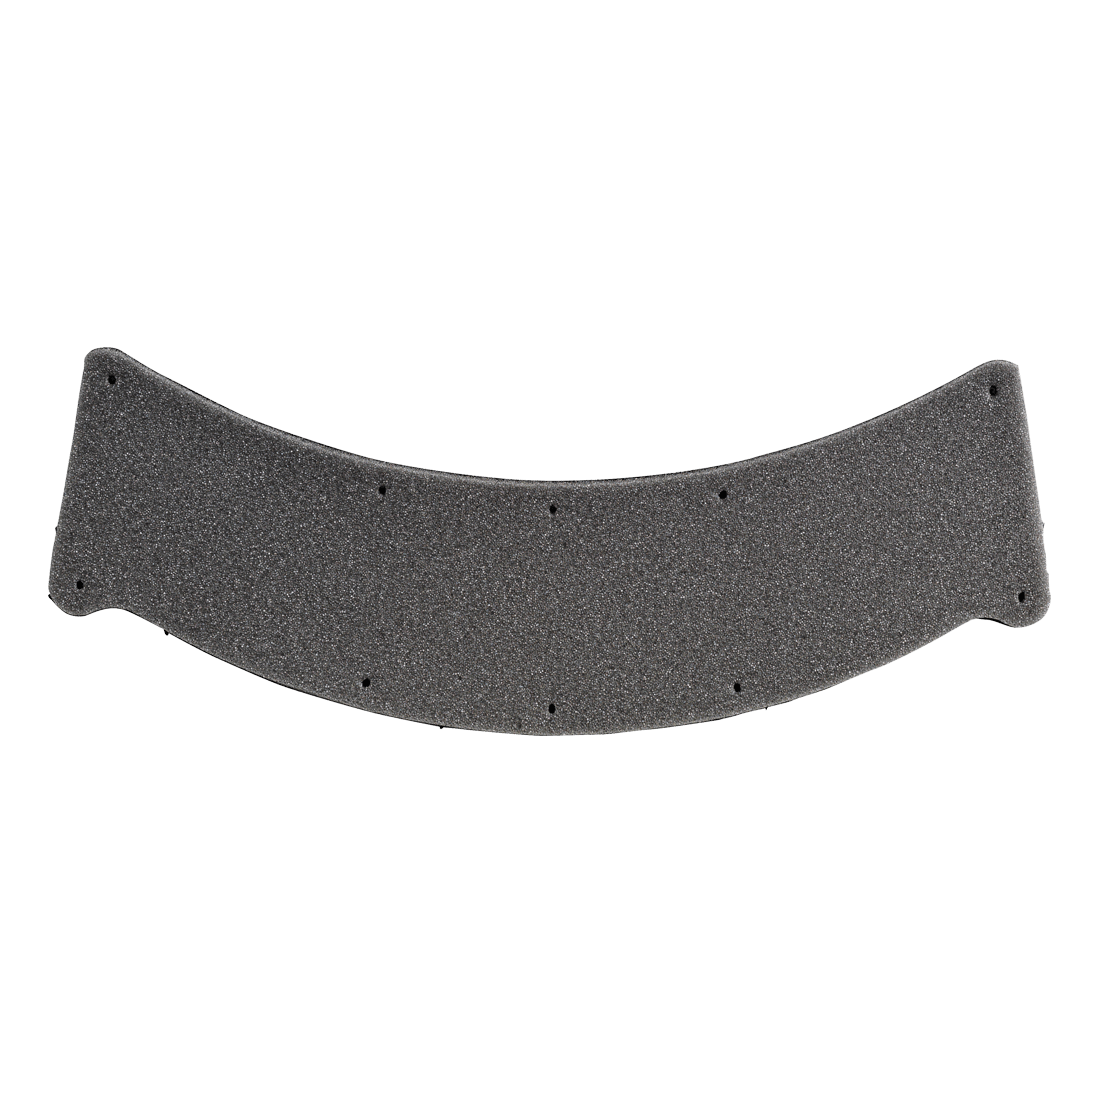 Sweatband for Style 600